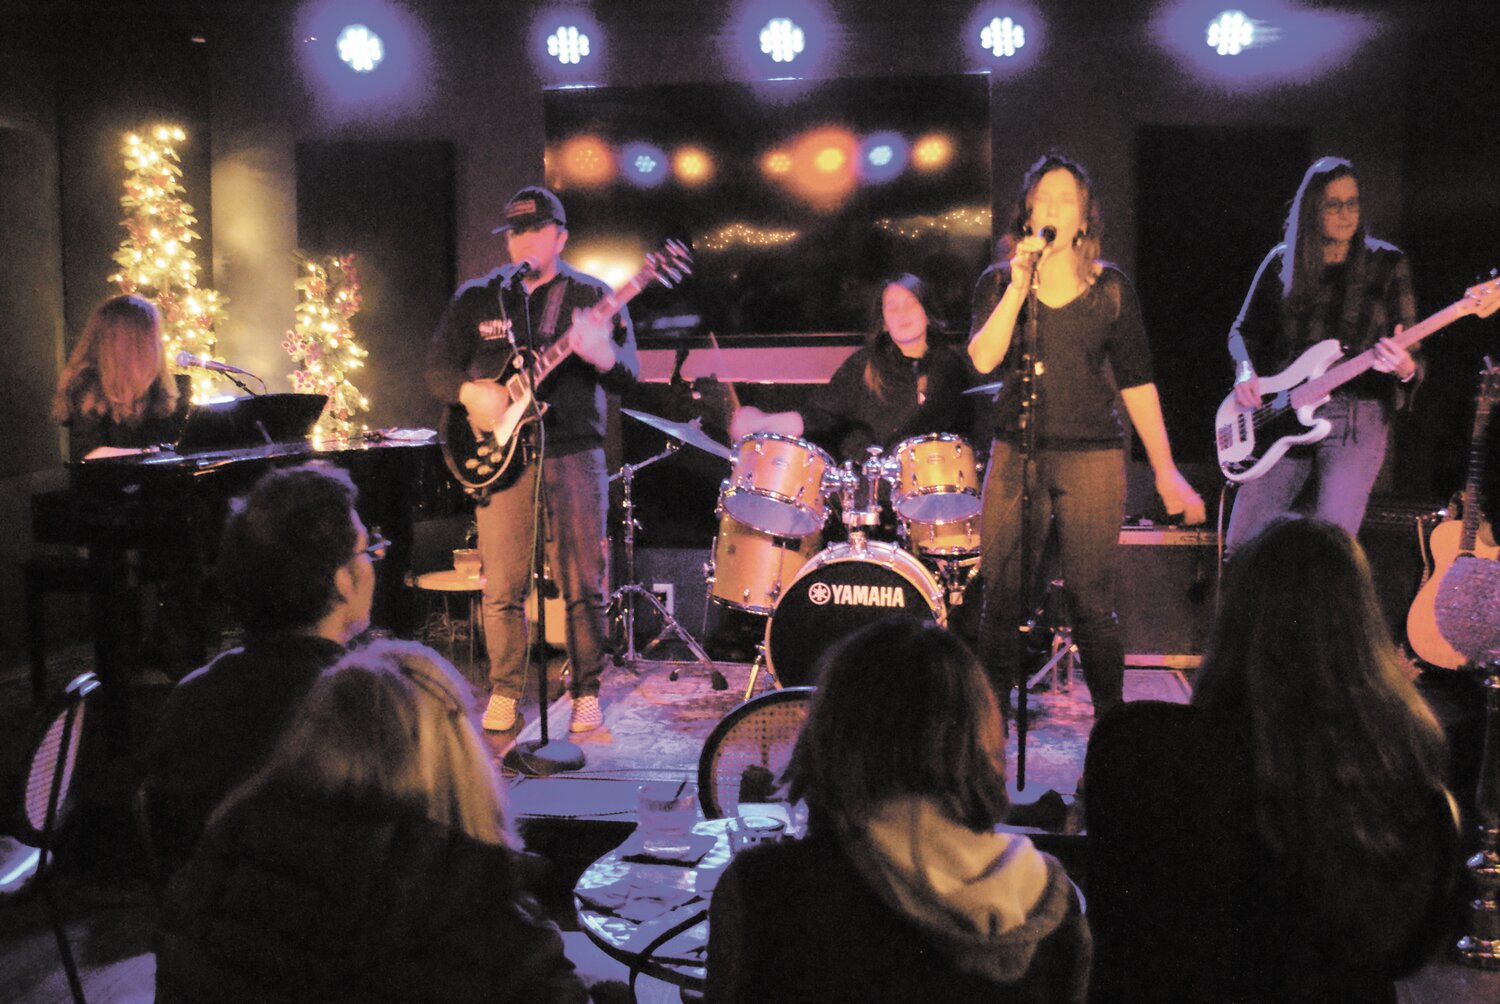 THE BAND CAME TO TOWN: Still House was among the full bands who performed at the open mic. From left to right, Ell Gurney on piano, Sean Rogan on guitar, Olga Gervasi on drums, Selene Byron on vocals, and Andrea Degos on bass. (Photos by Steve Popiel)